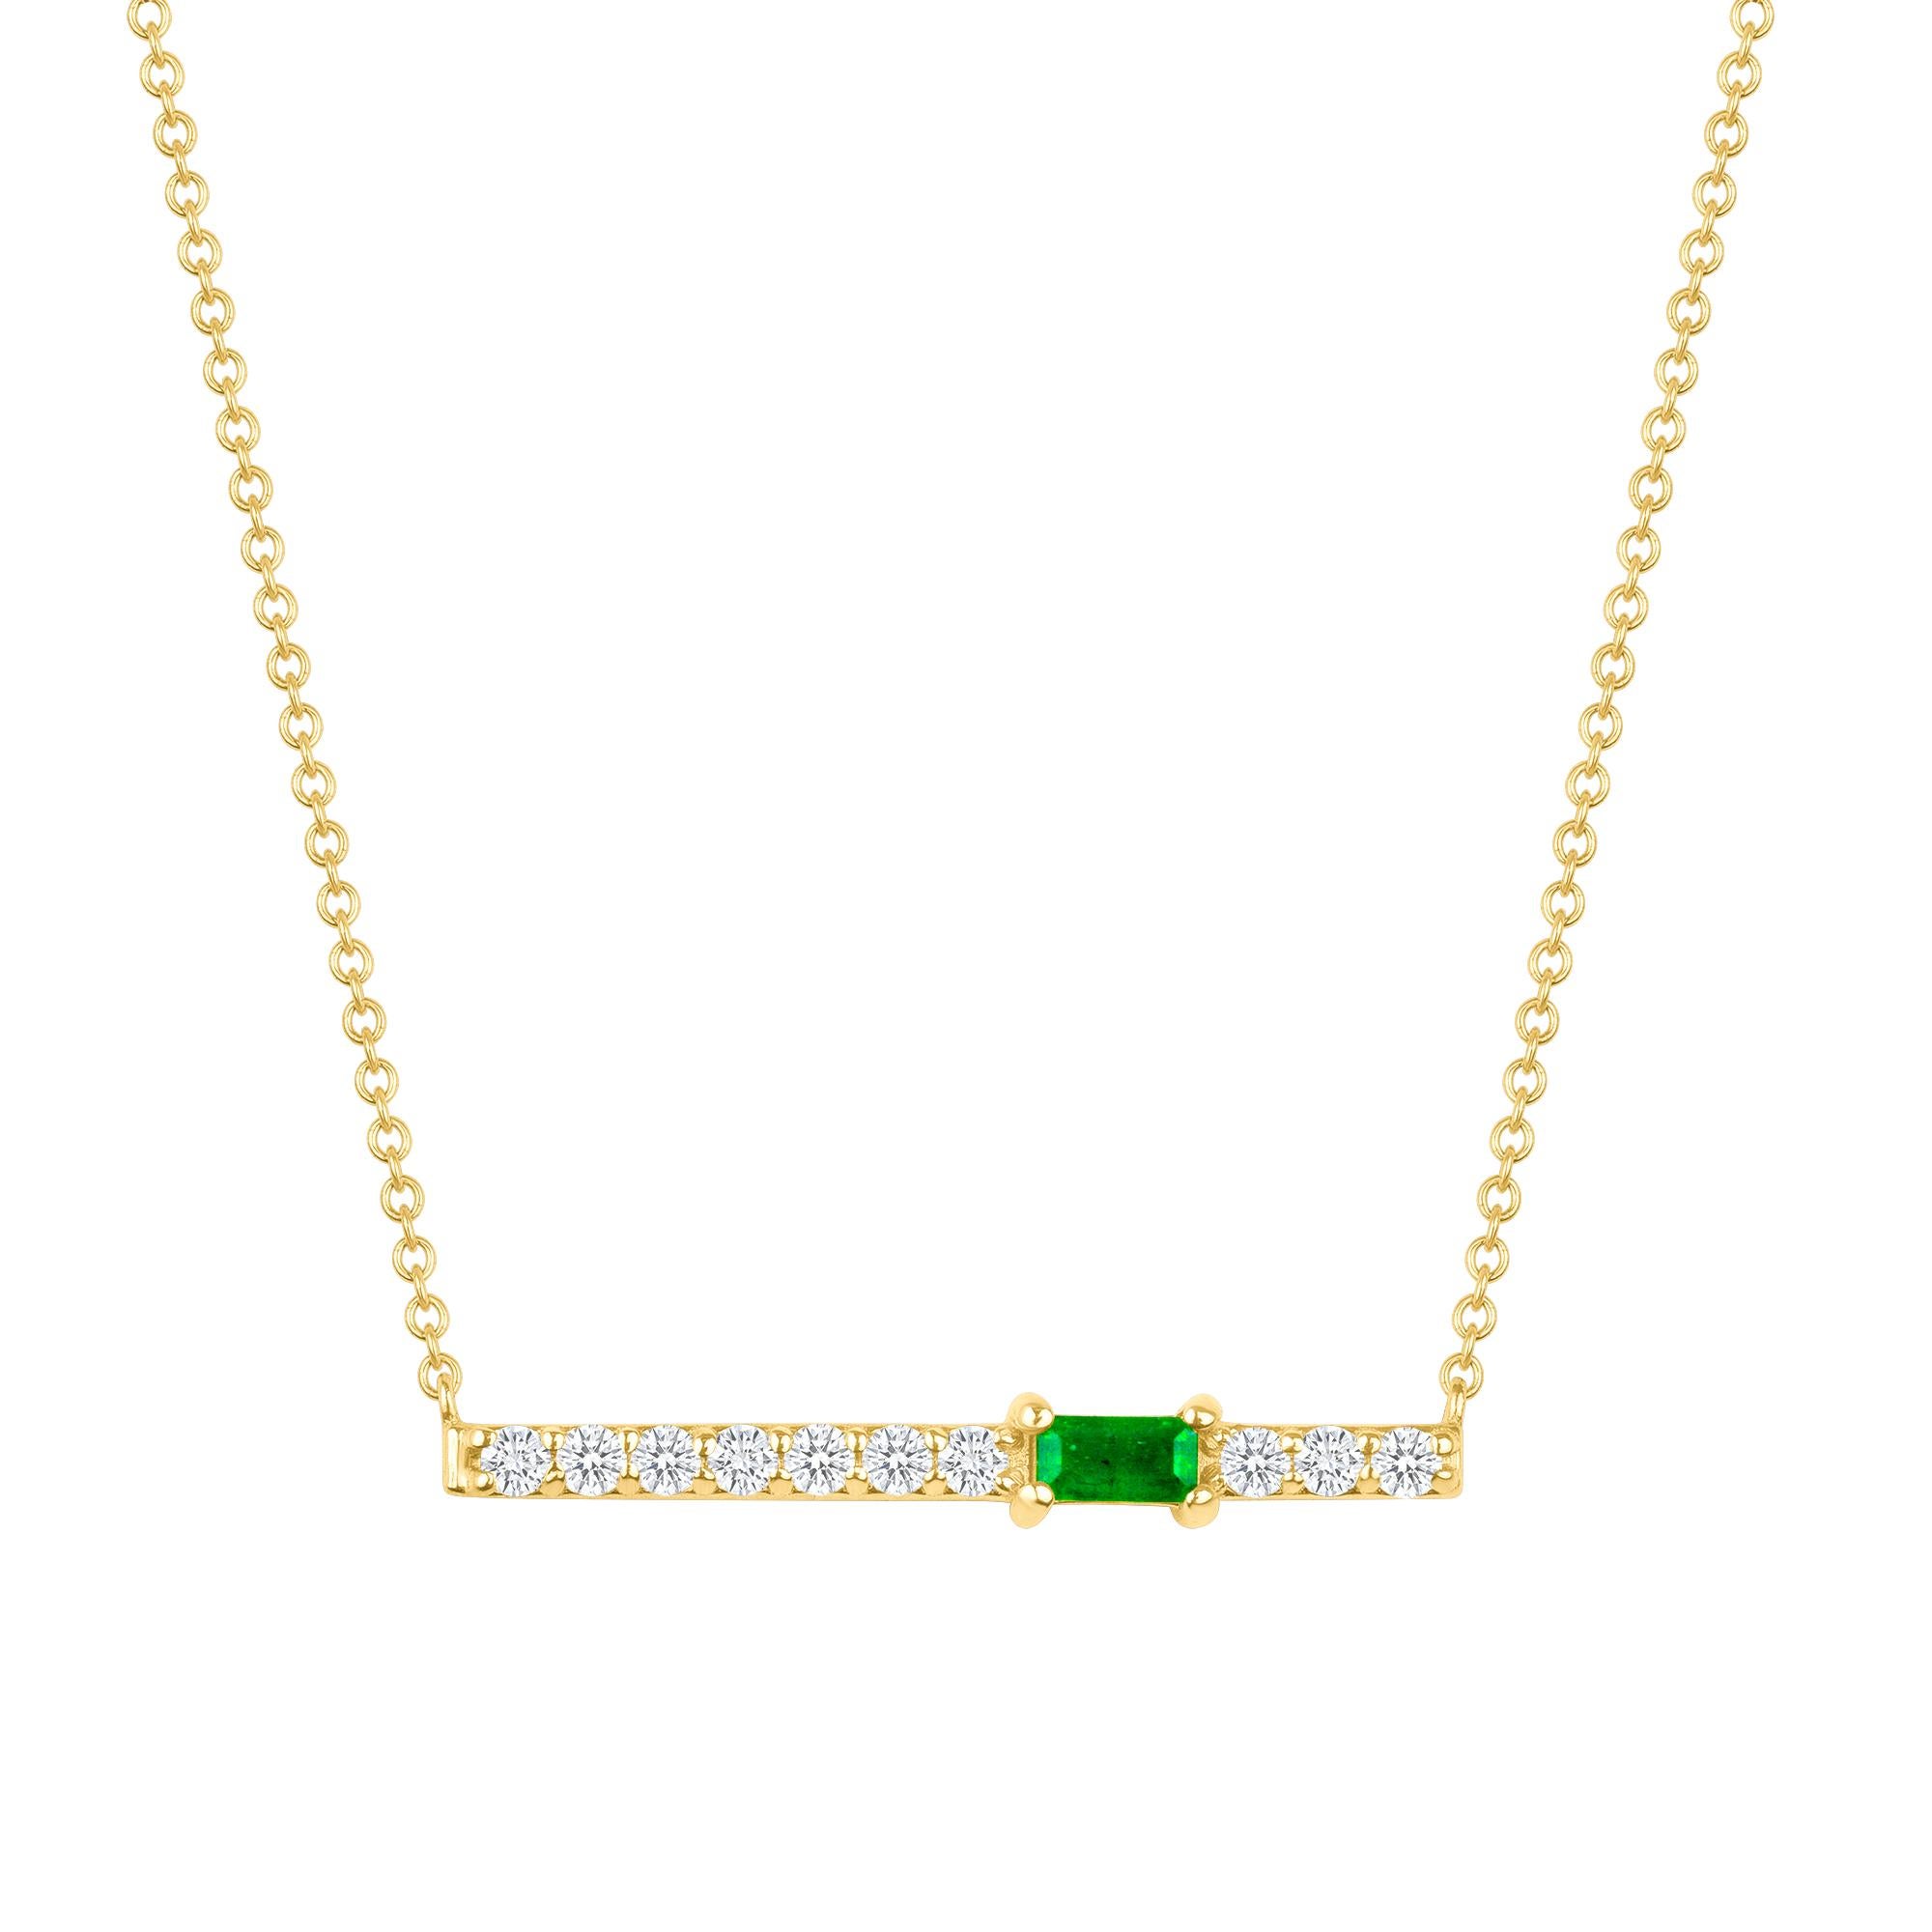 Crafted in 14K gold, round glistening diamonds enclose a baguette emerald stone on this contemporary bar pendant. This stunning necklace is a modern piece that sits elegantly above the collarbone making it the perfect necklace for layering or just